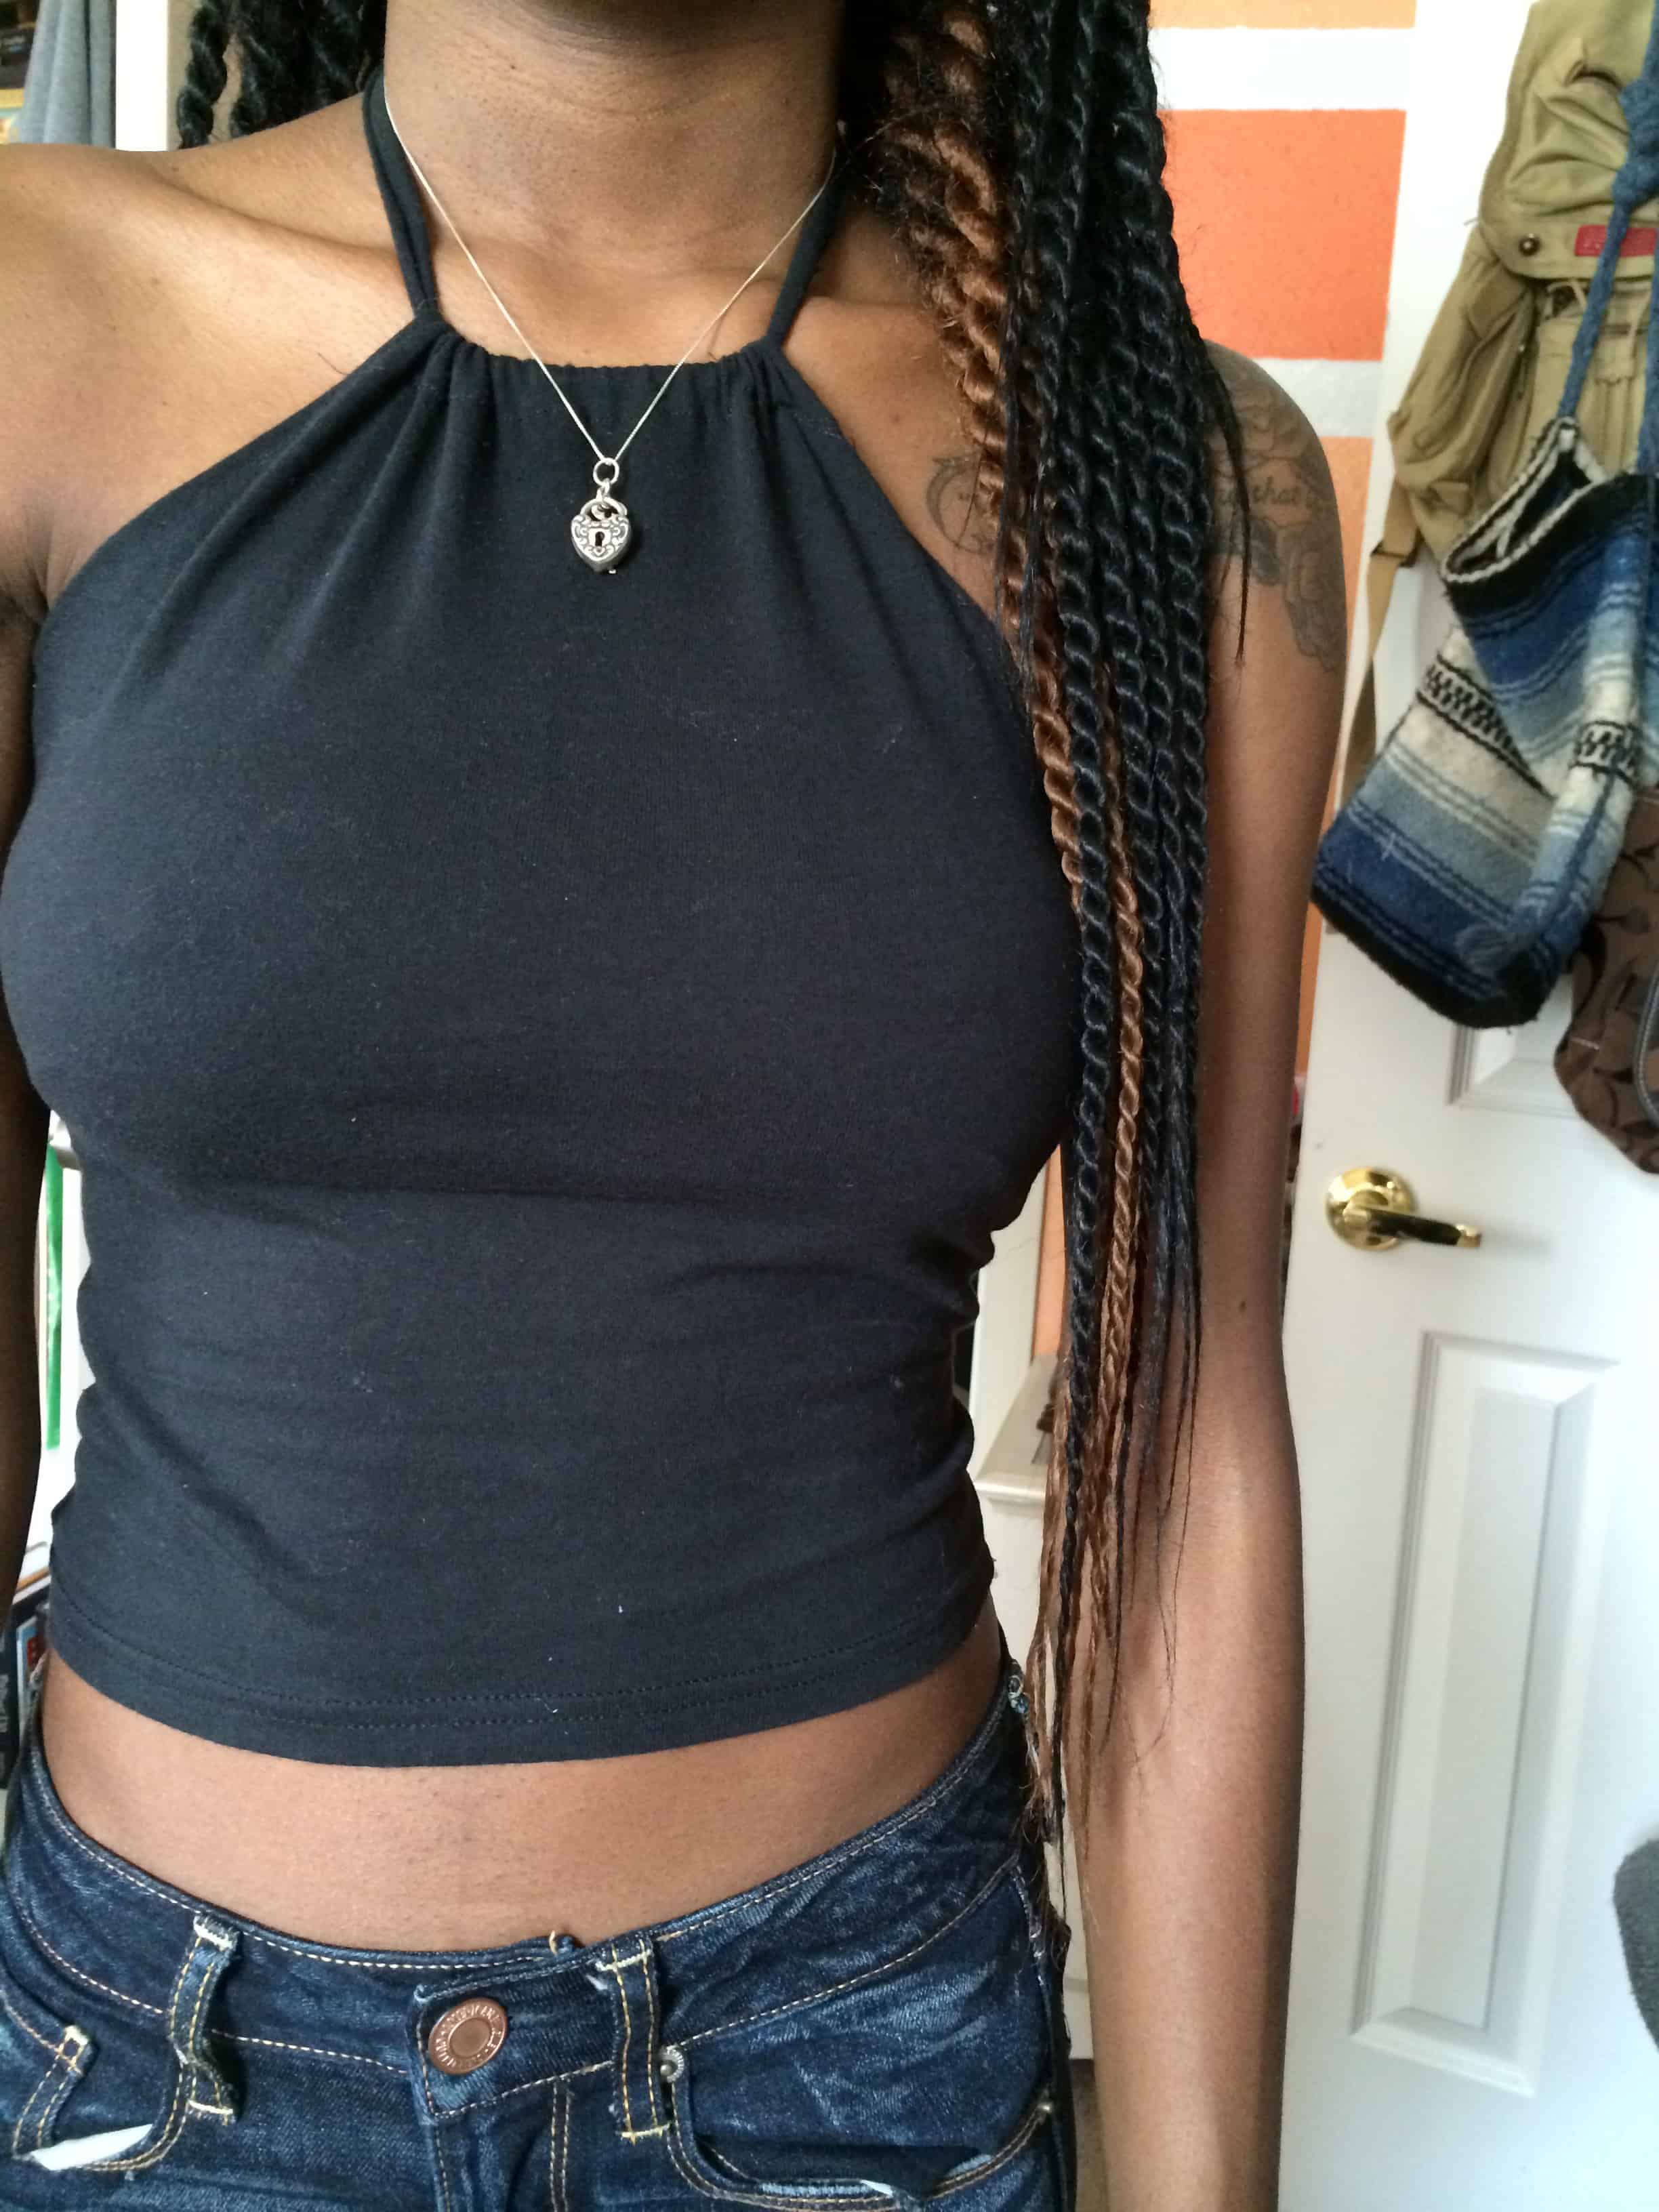 Diy halter with a pinched string top